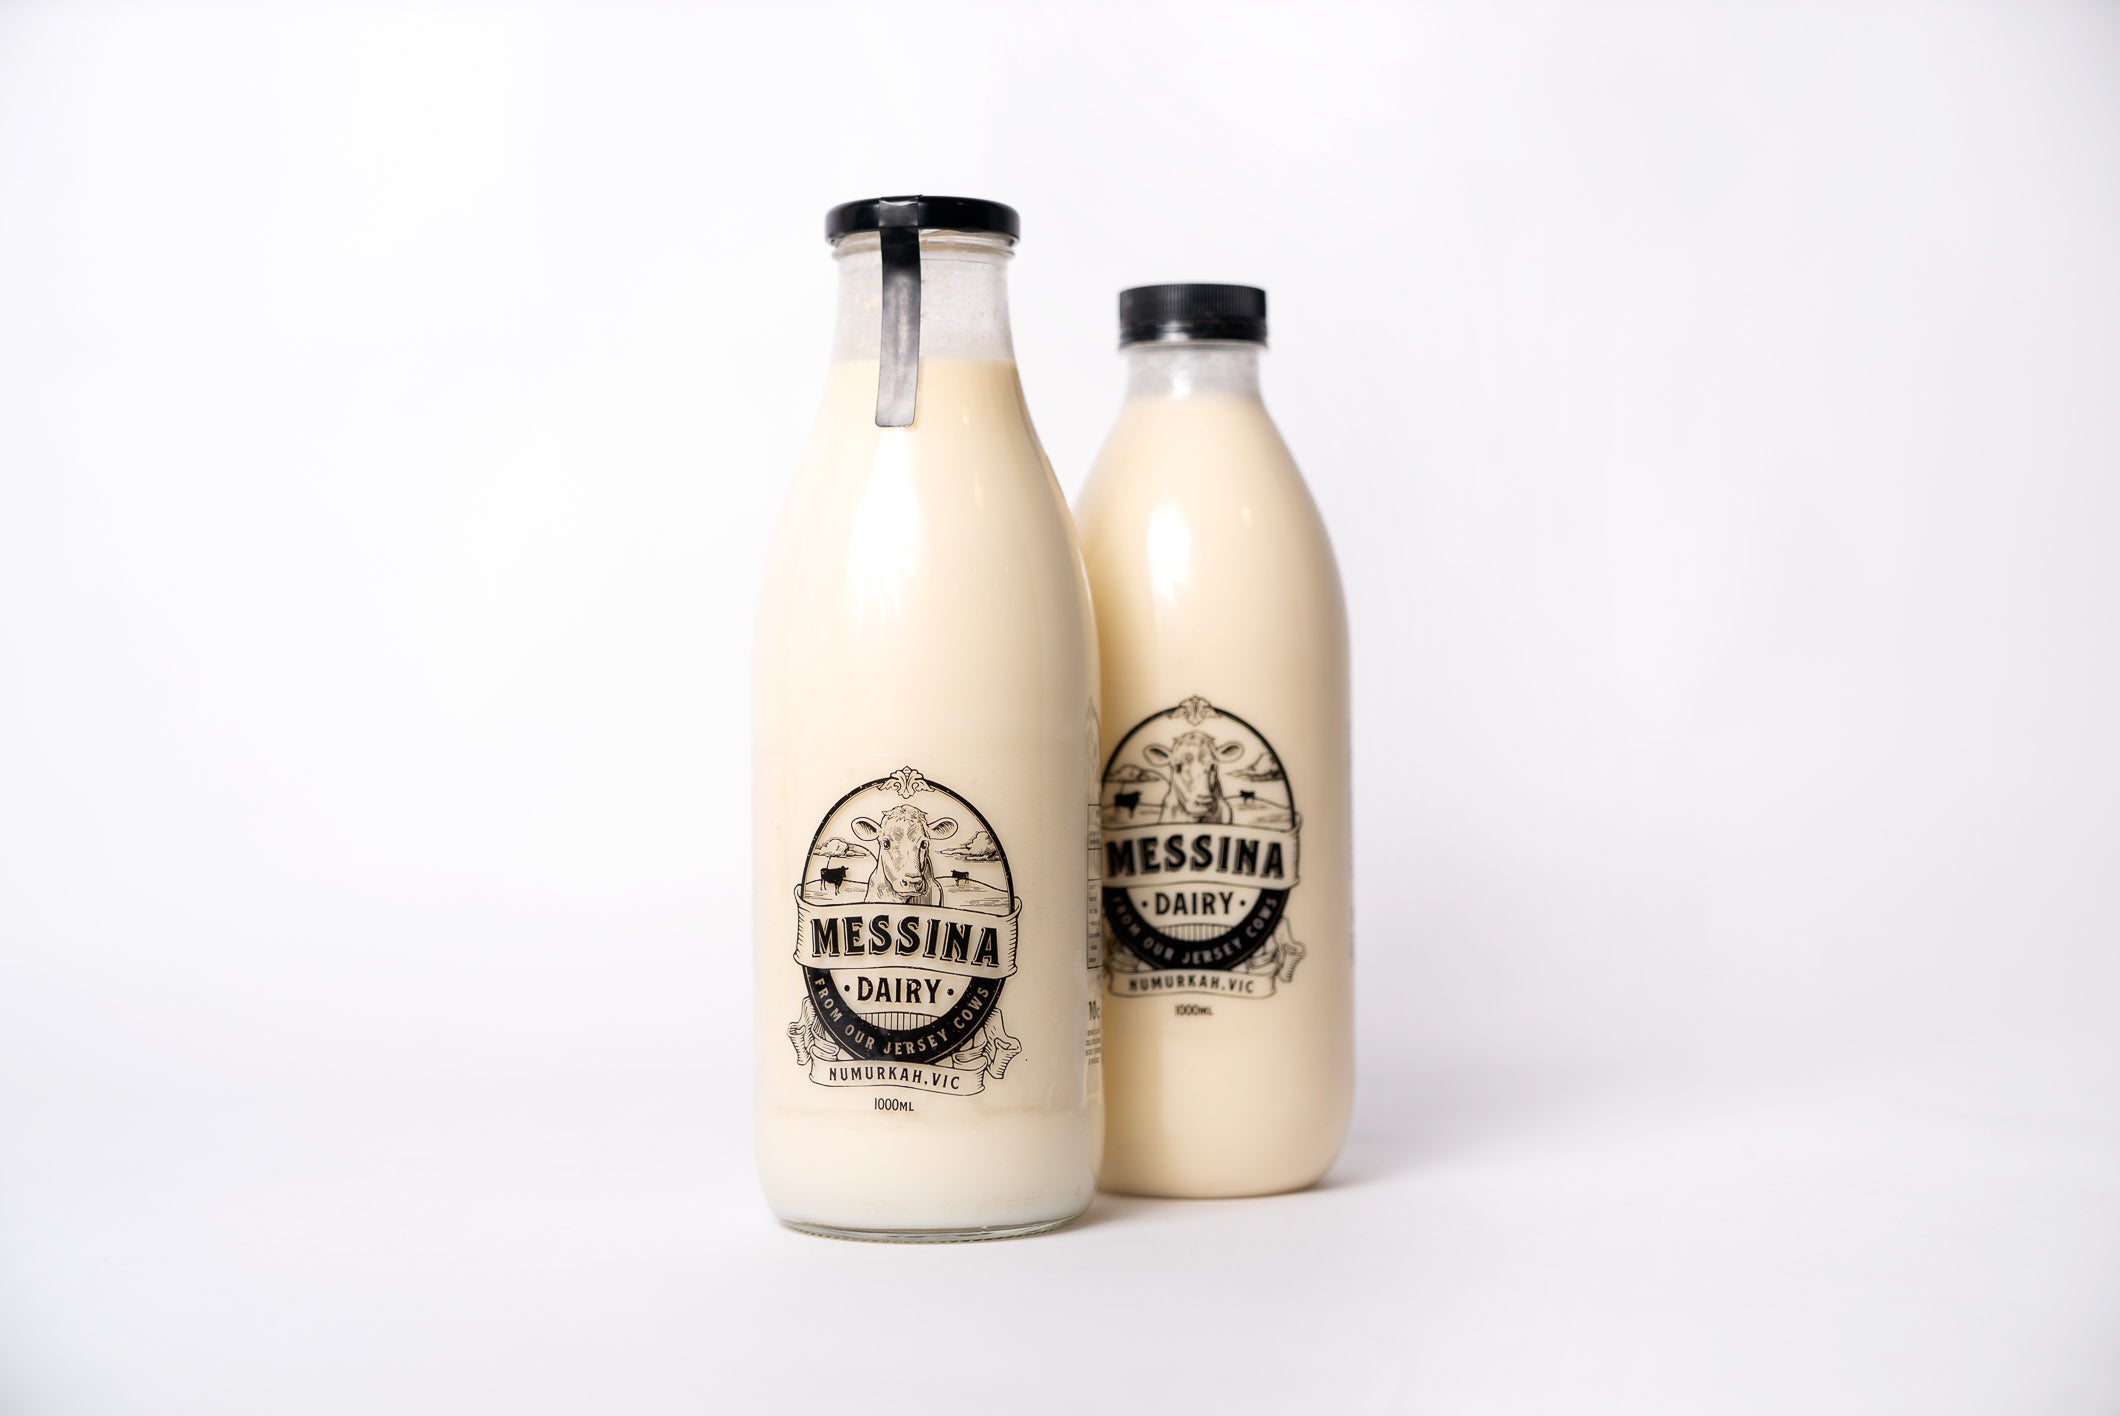 Messina Jersey Milk – Now Available In Glass And Plastic Bottles